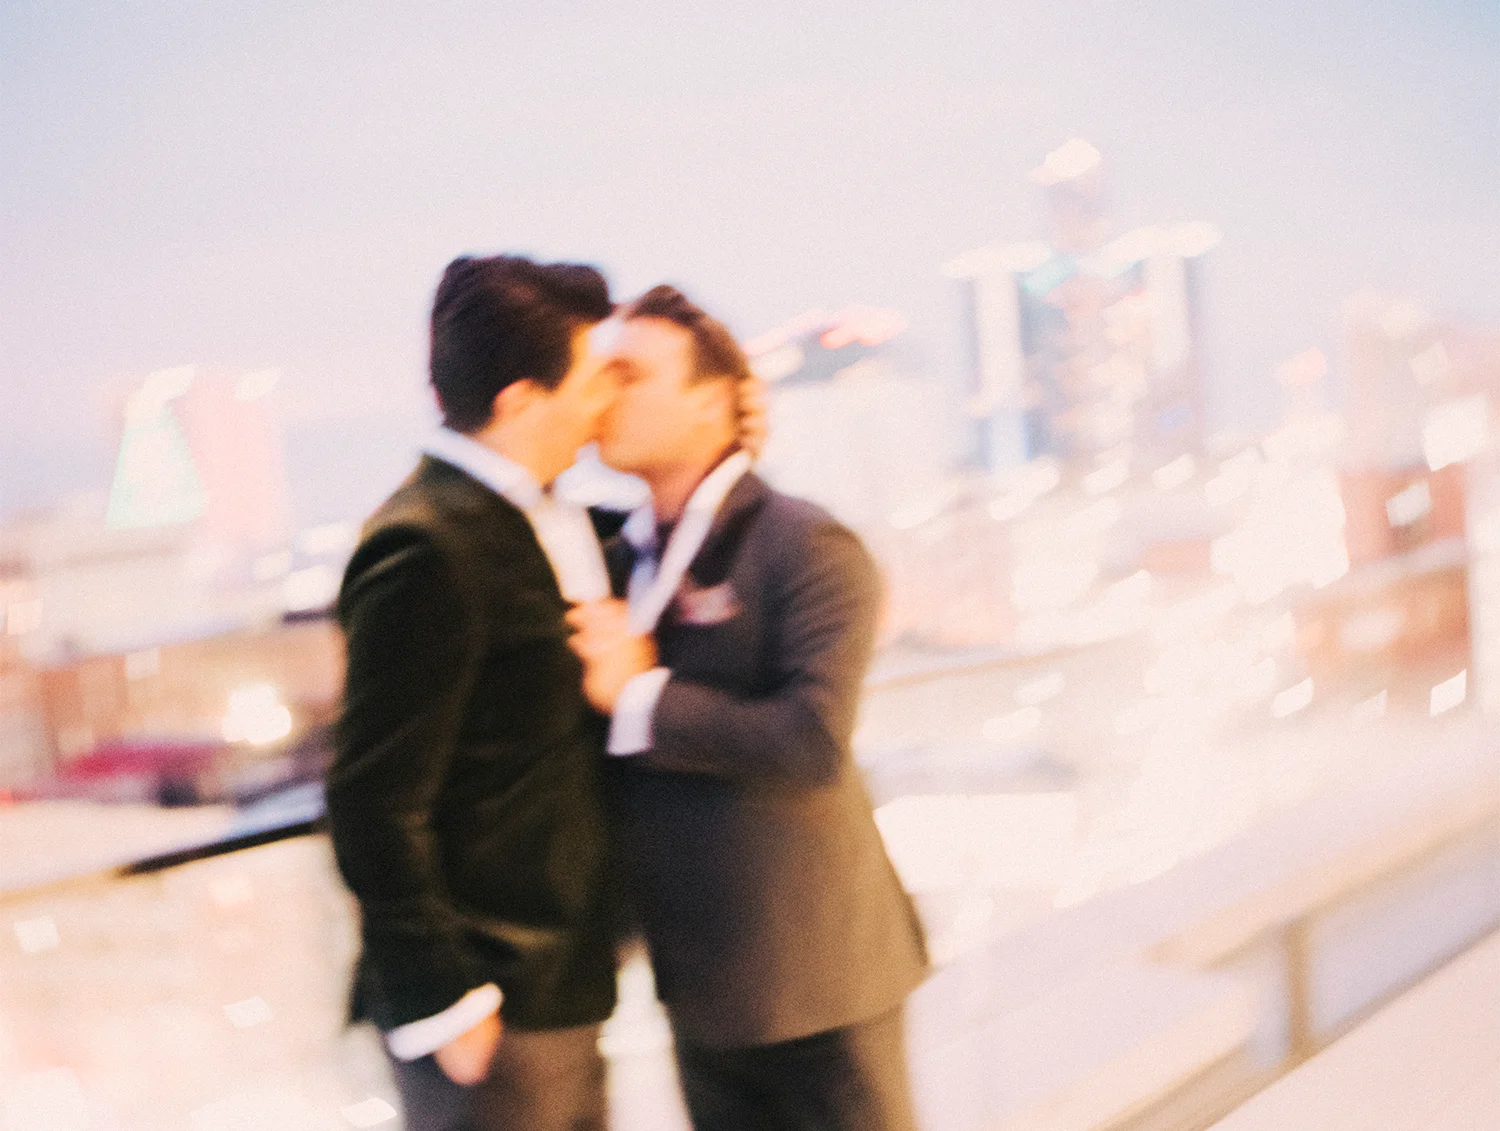 Lou and Vincent sharing a kiss with the city skyline in the background